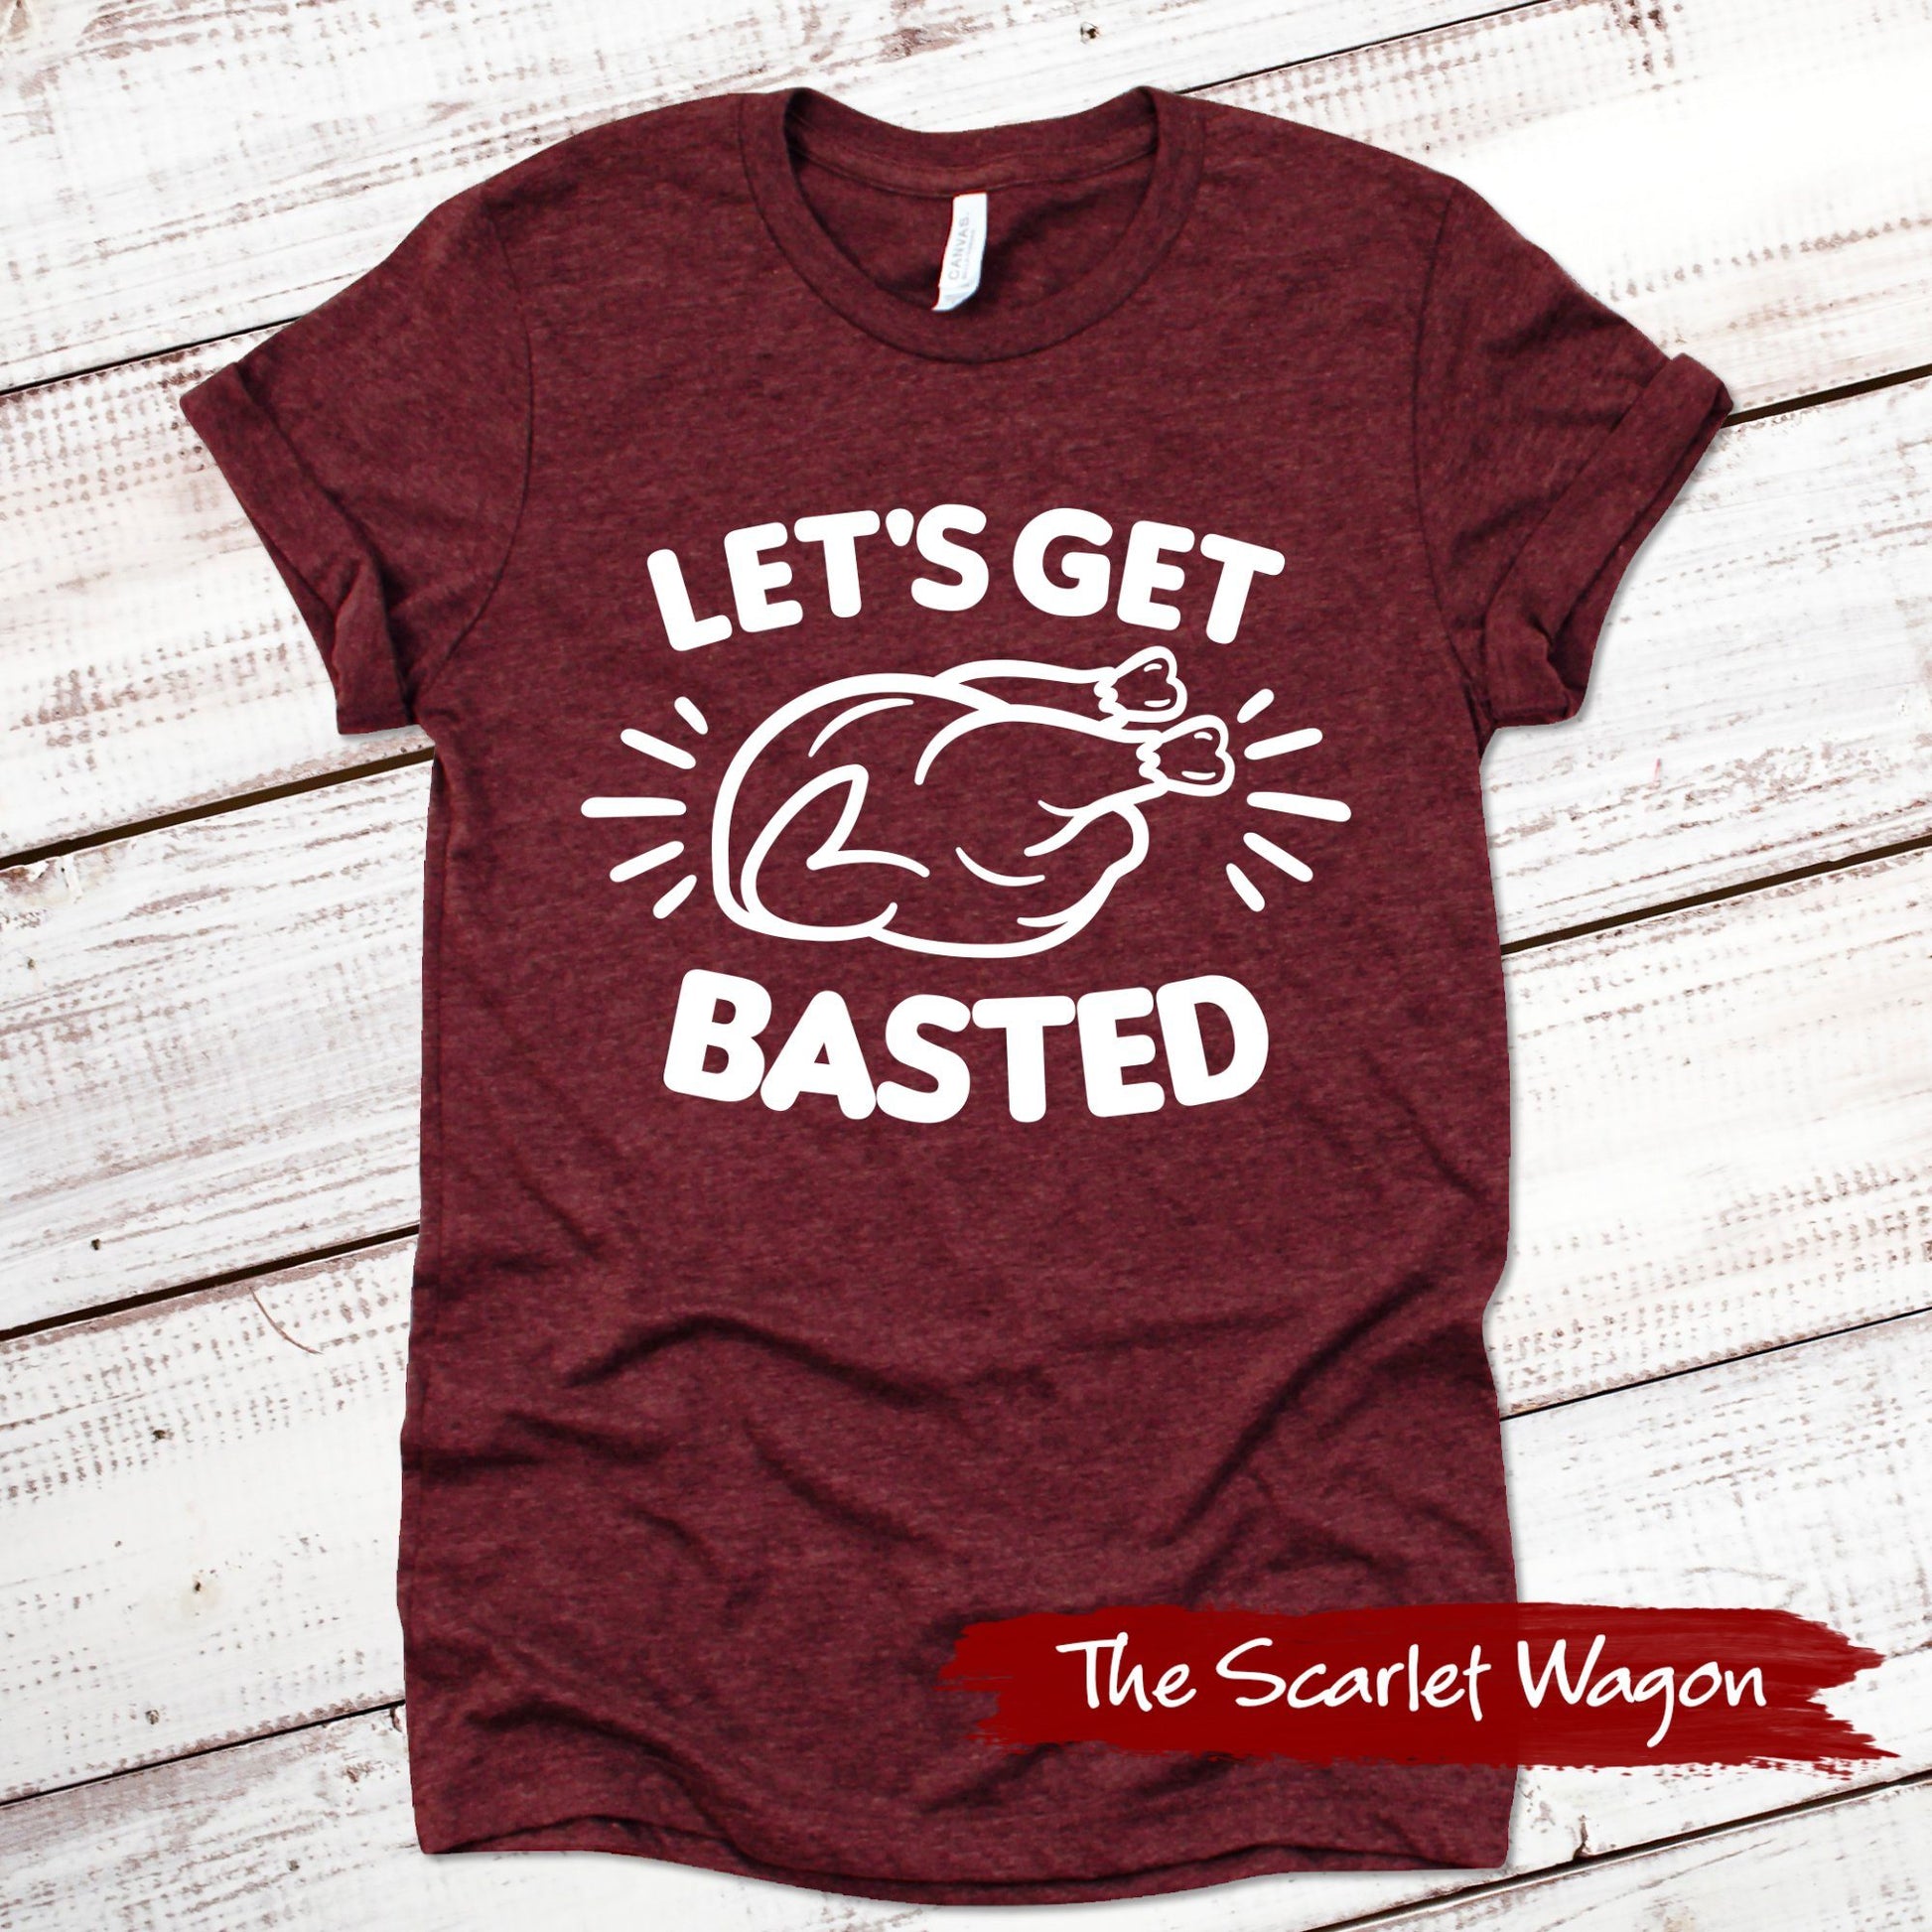 Let's Get Basted Thanksgiving Shirt Scarlet Wagon Heather Cardinal XS 